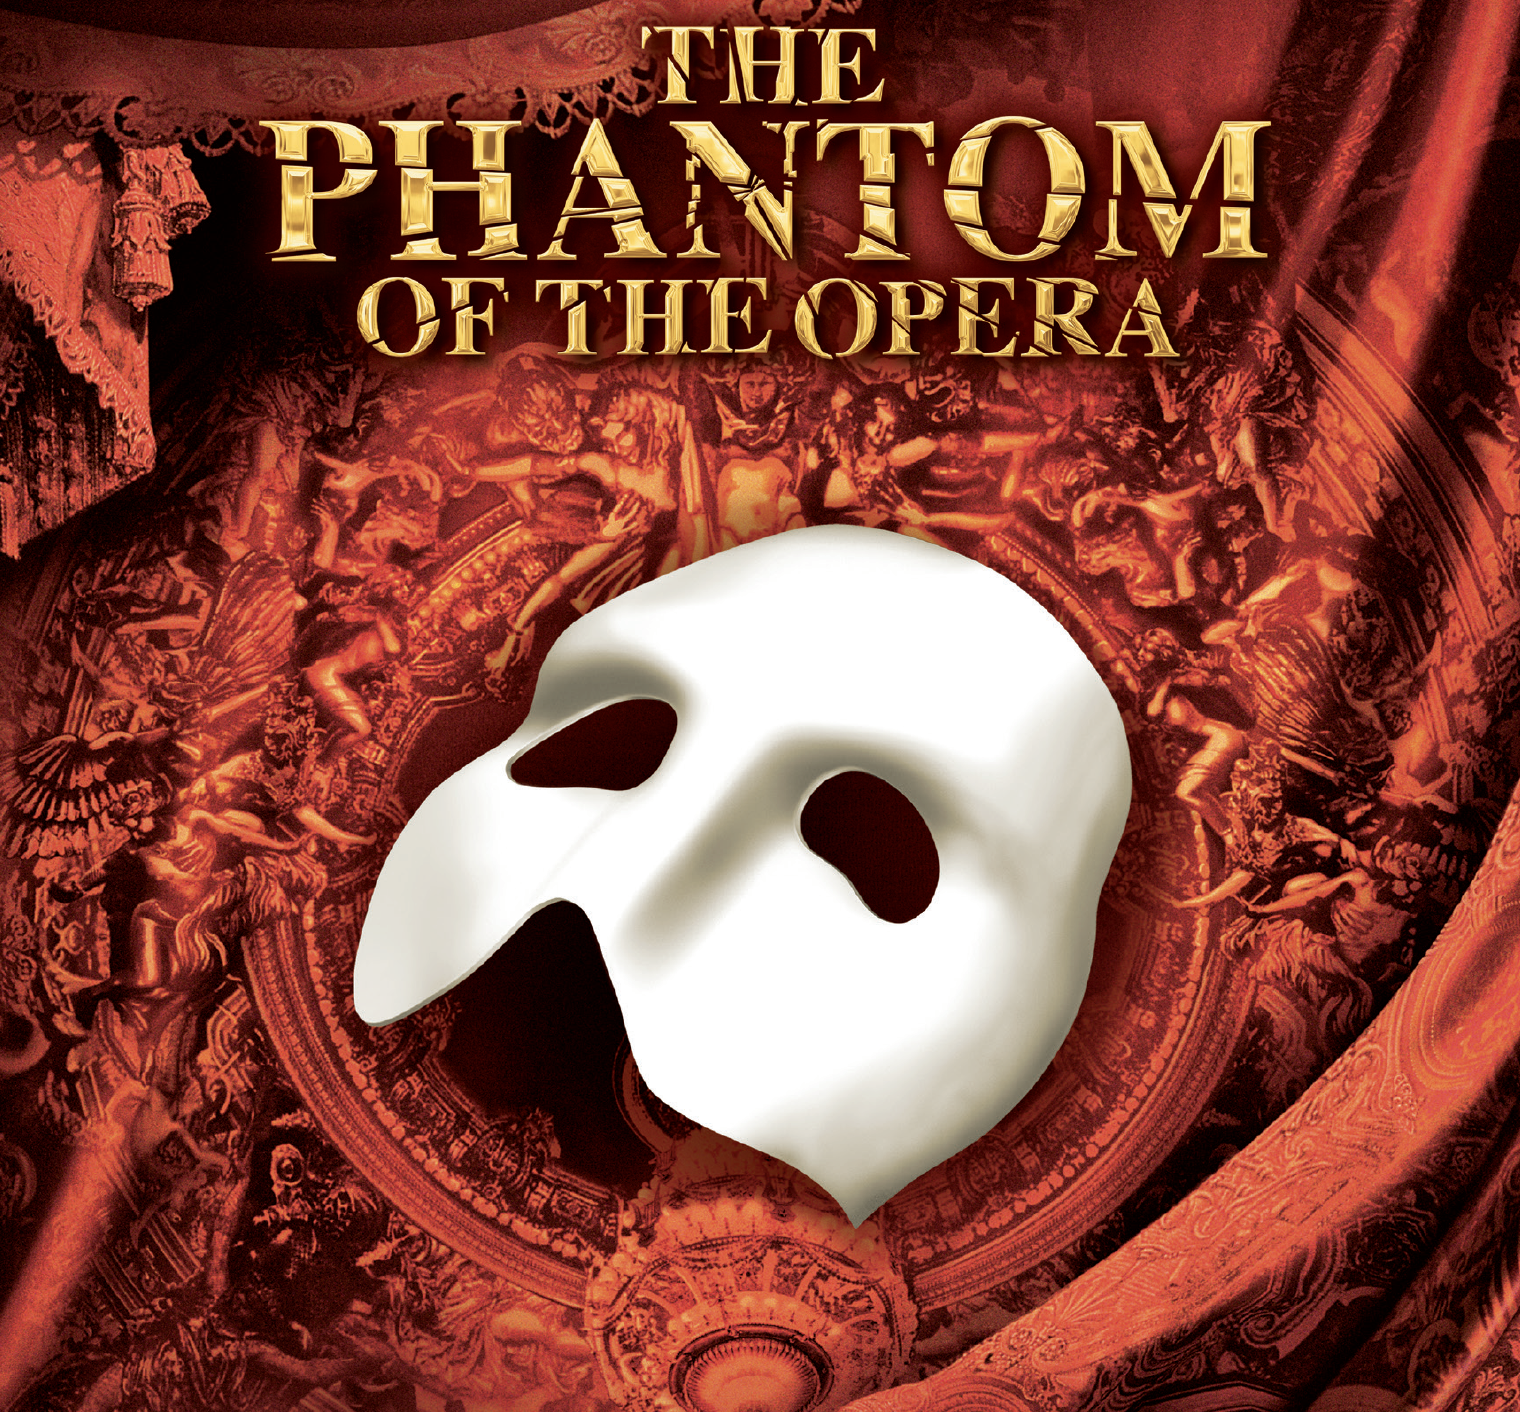 Faculty and staff are offered a discount on “The Phantom of the Opera” tickets.